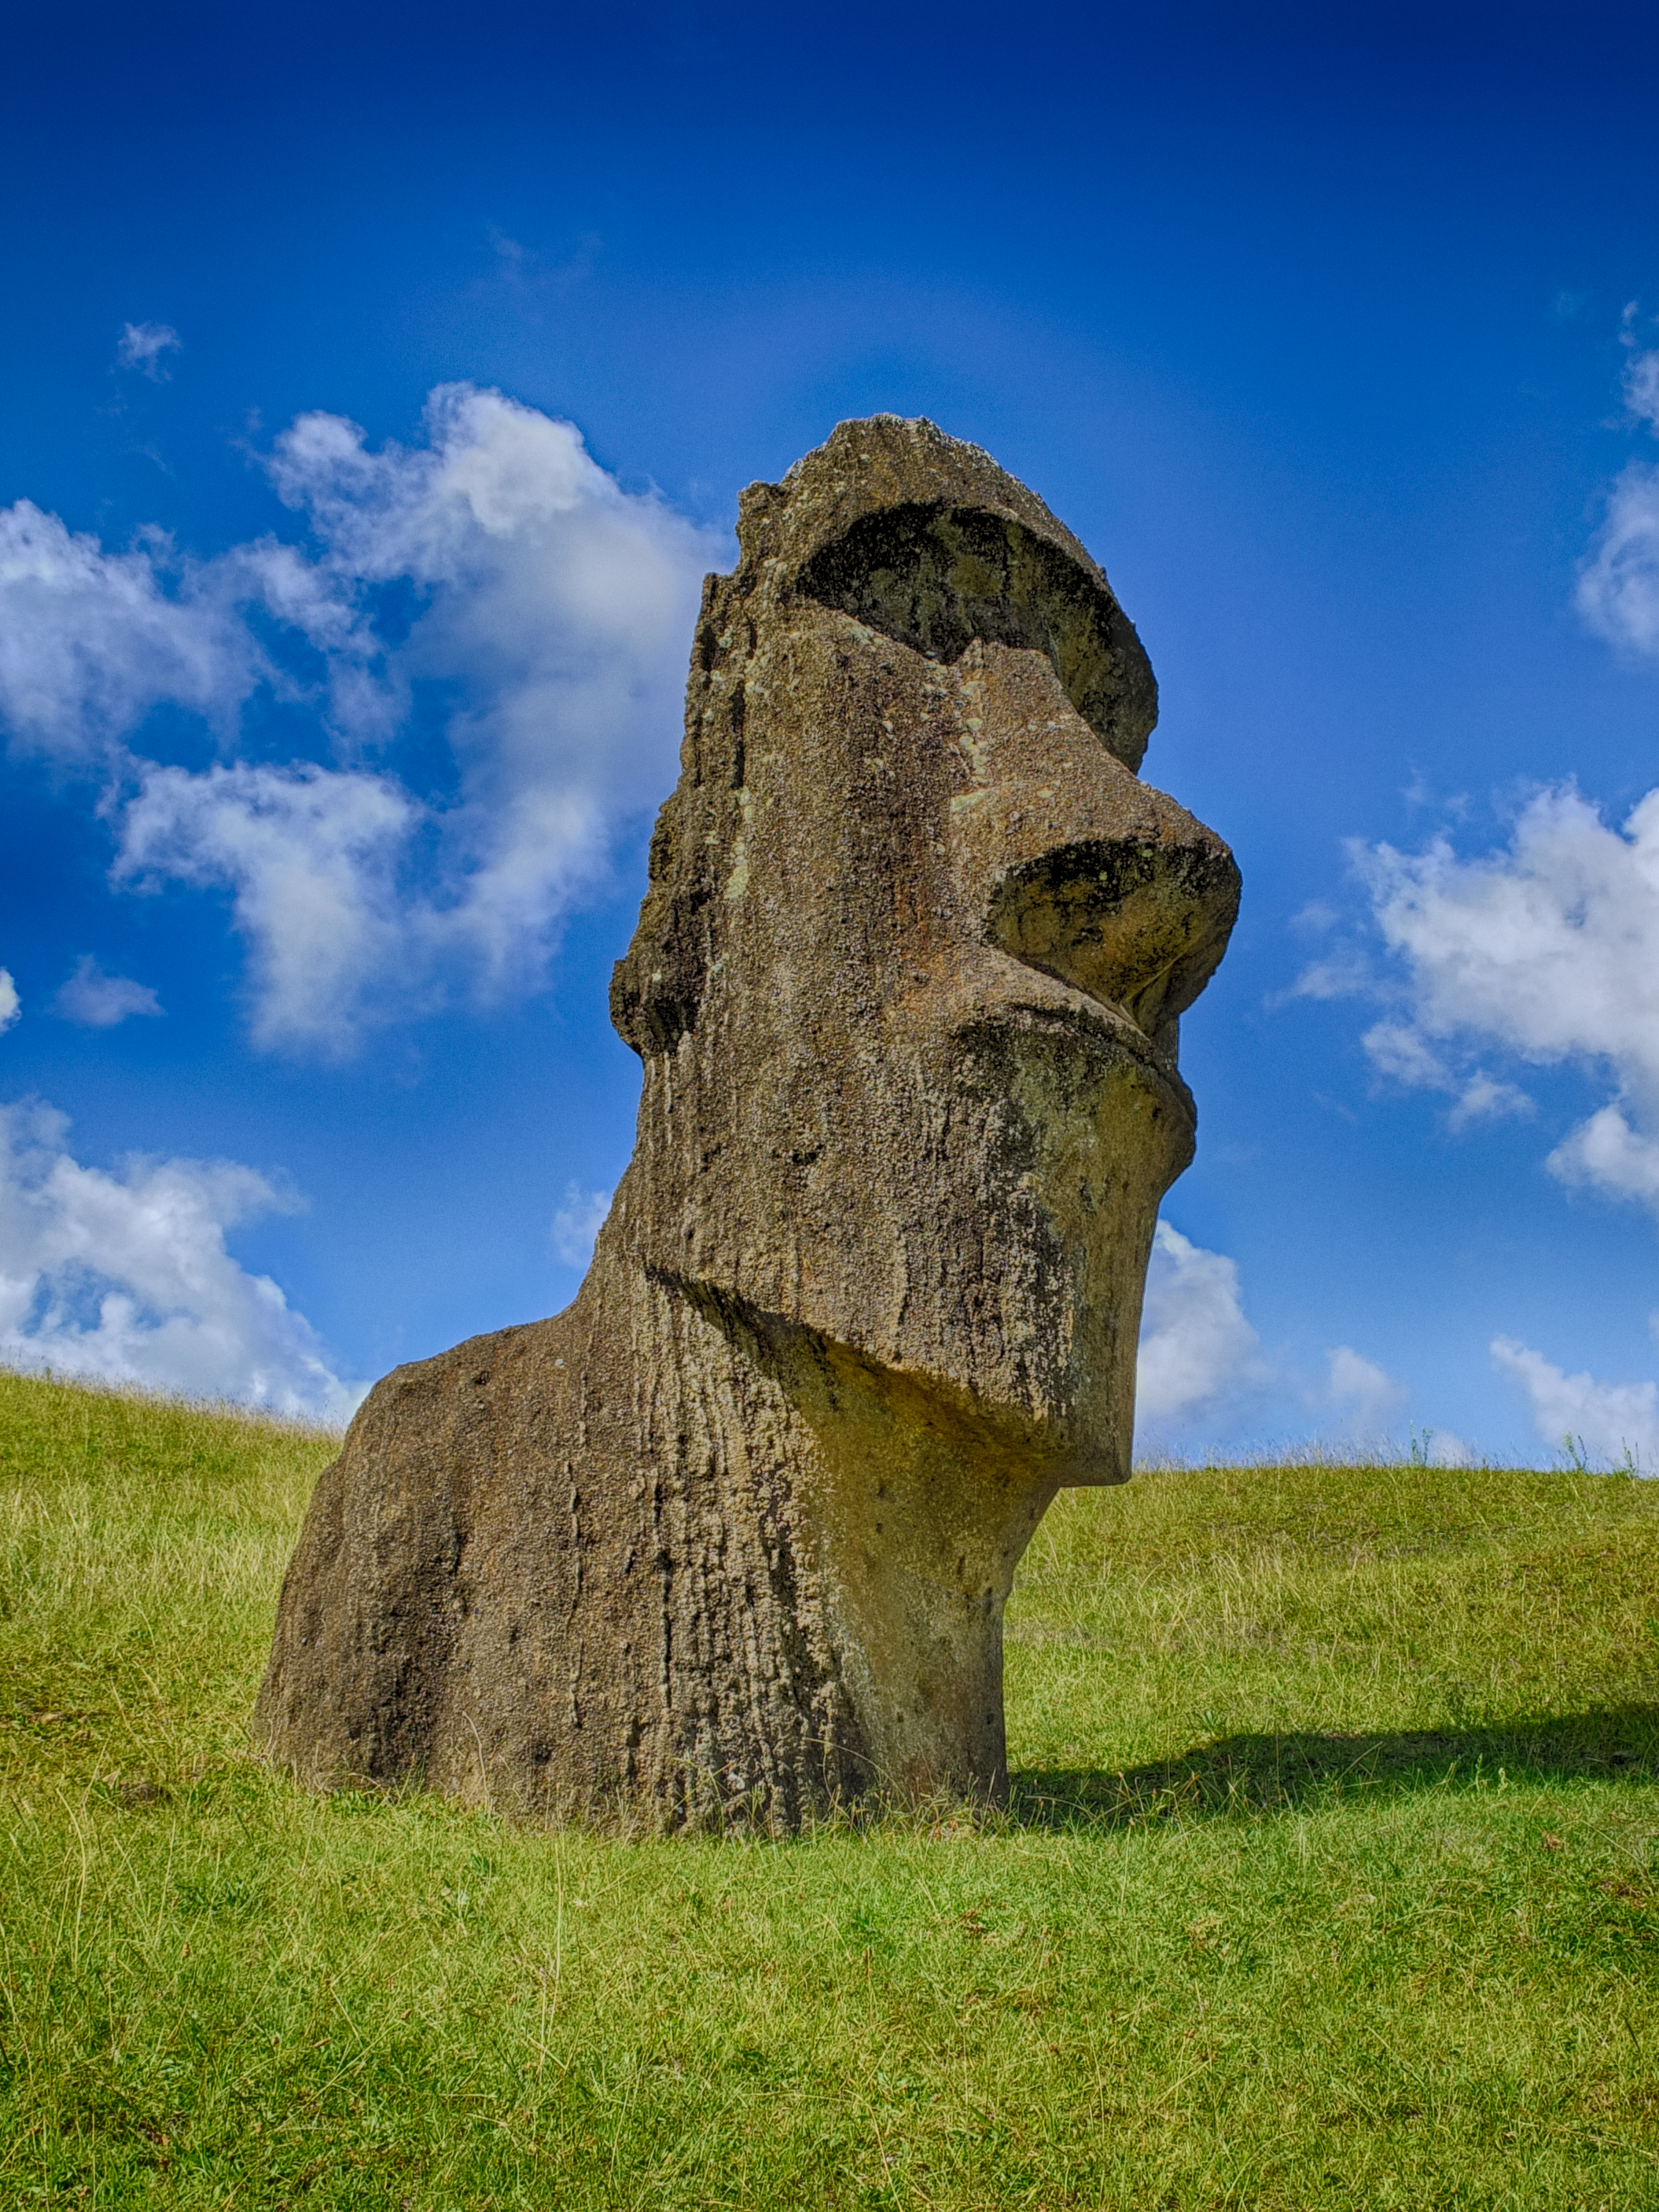 The Moai statues of Easter Island | Tribes Travel tailor-made